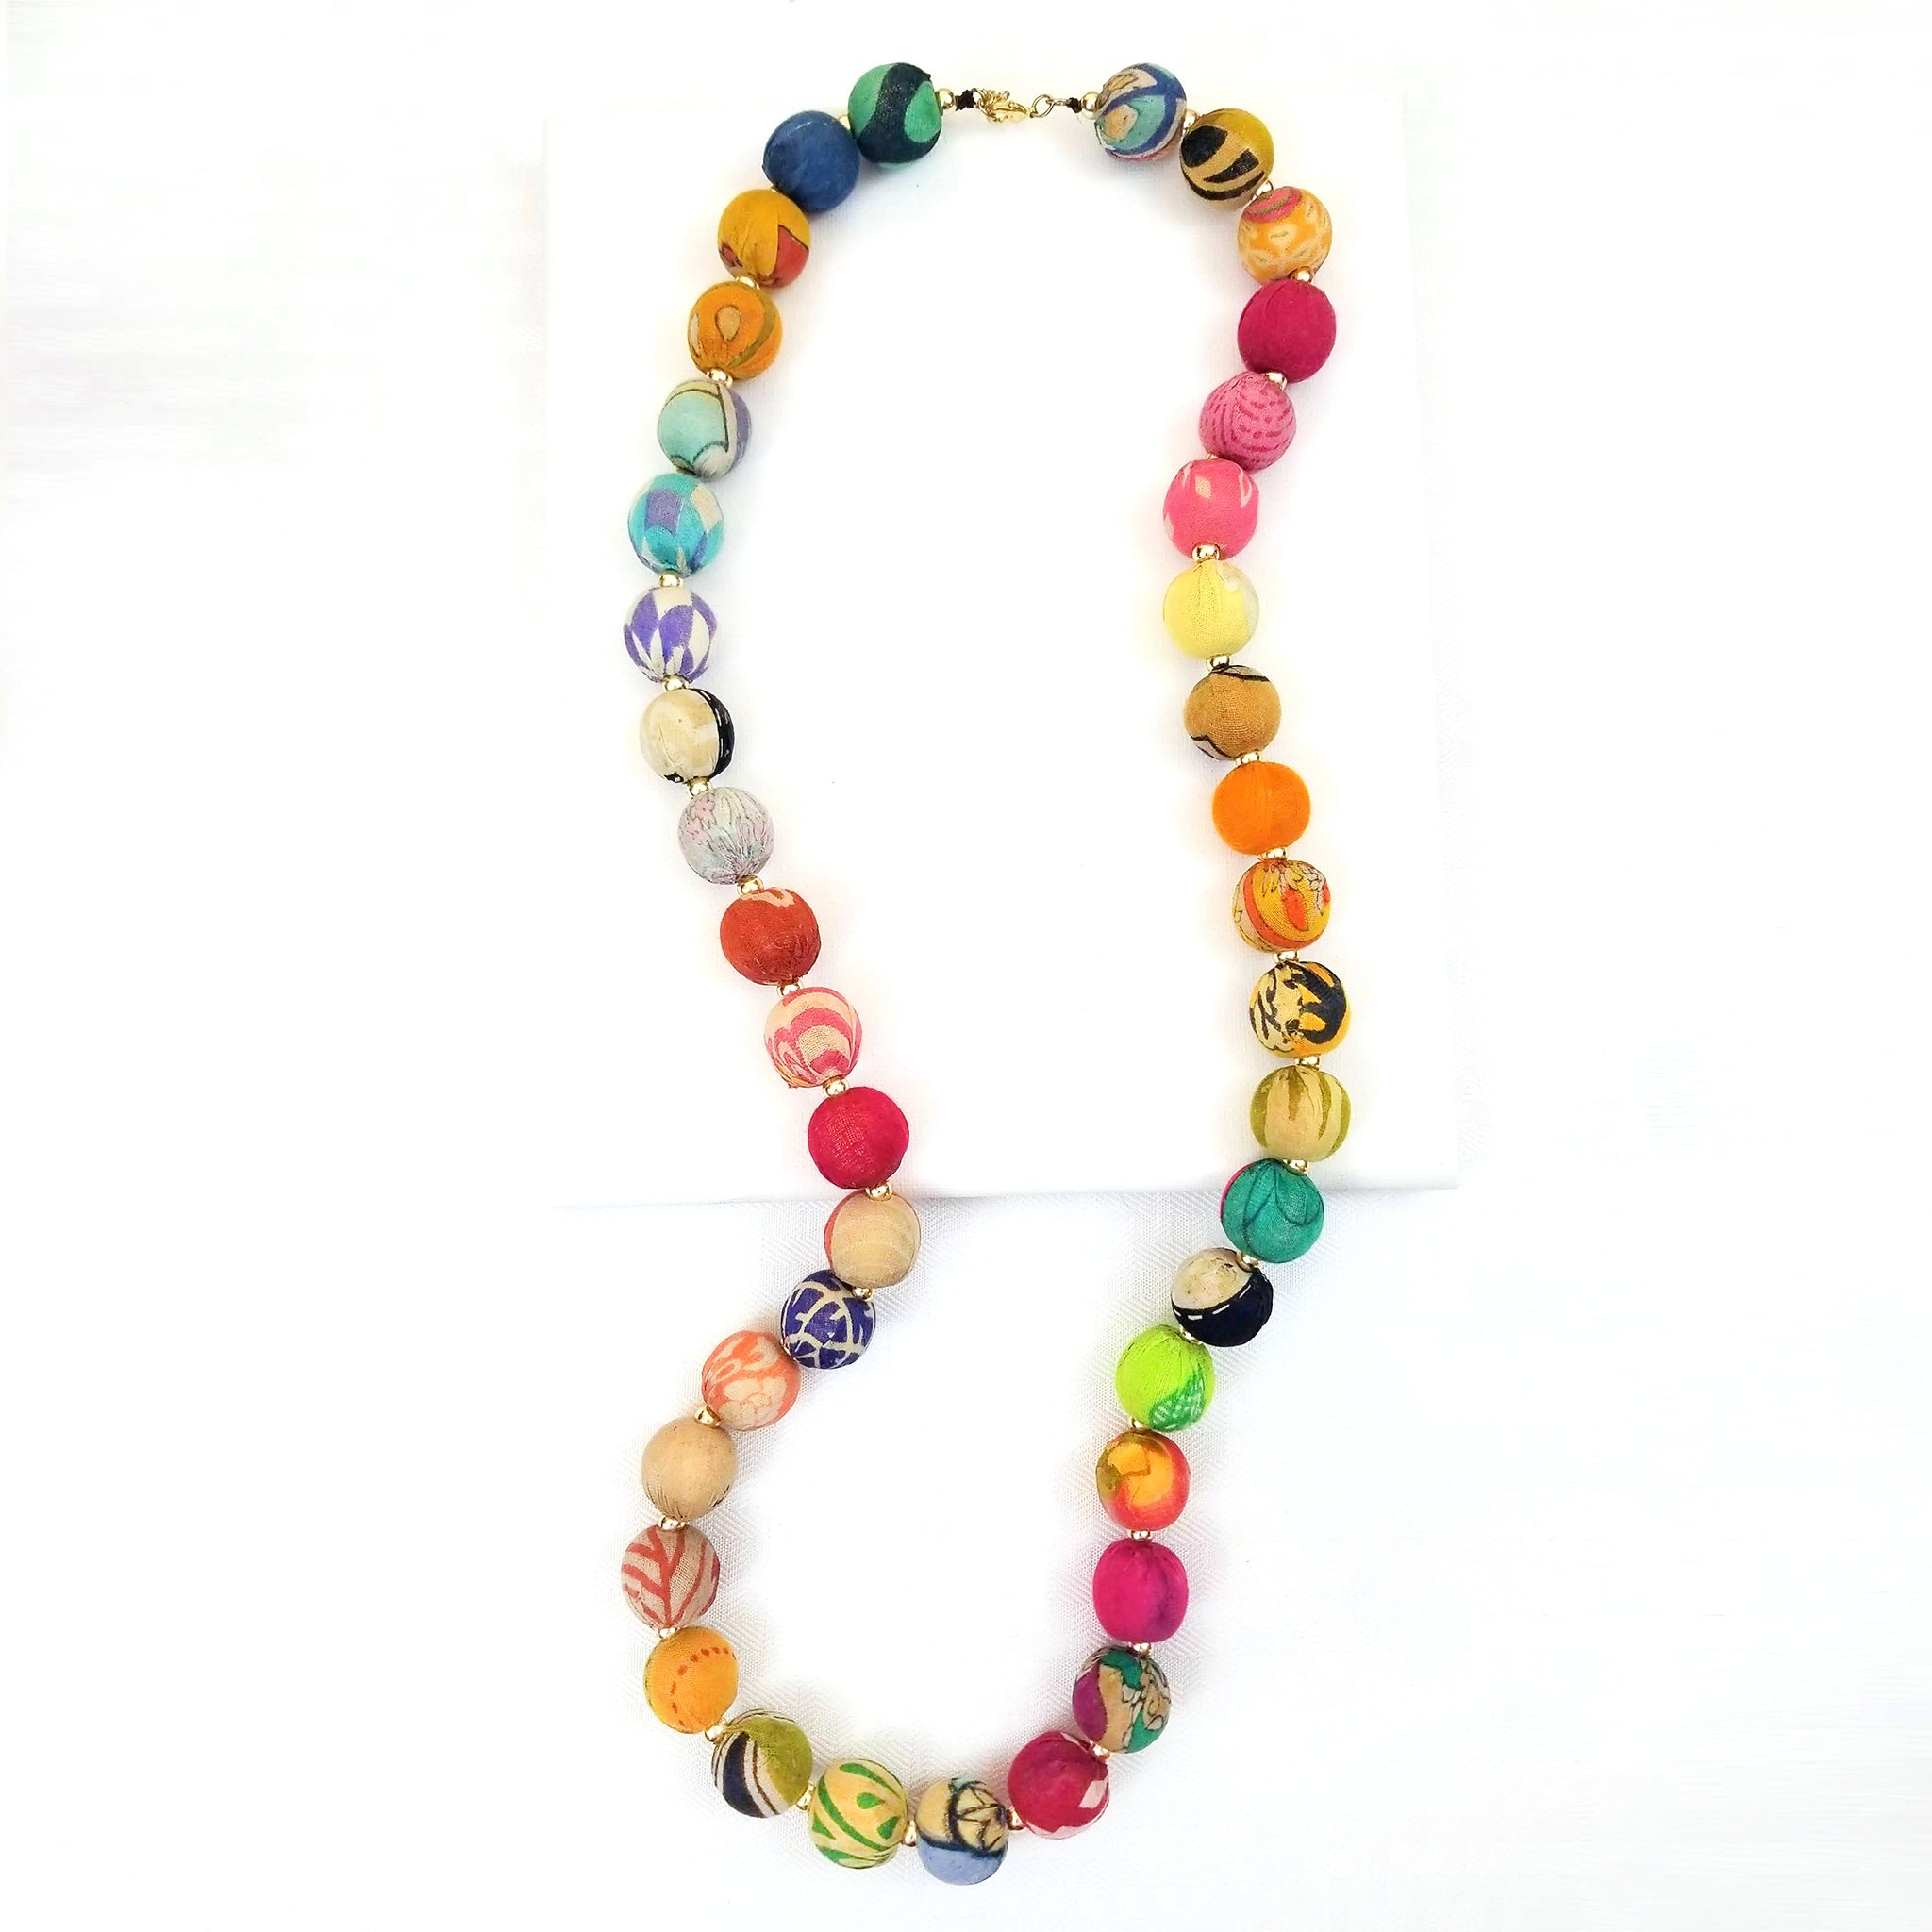 A single colorful Kantha Garland Necklace rests on a white table.